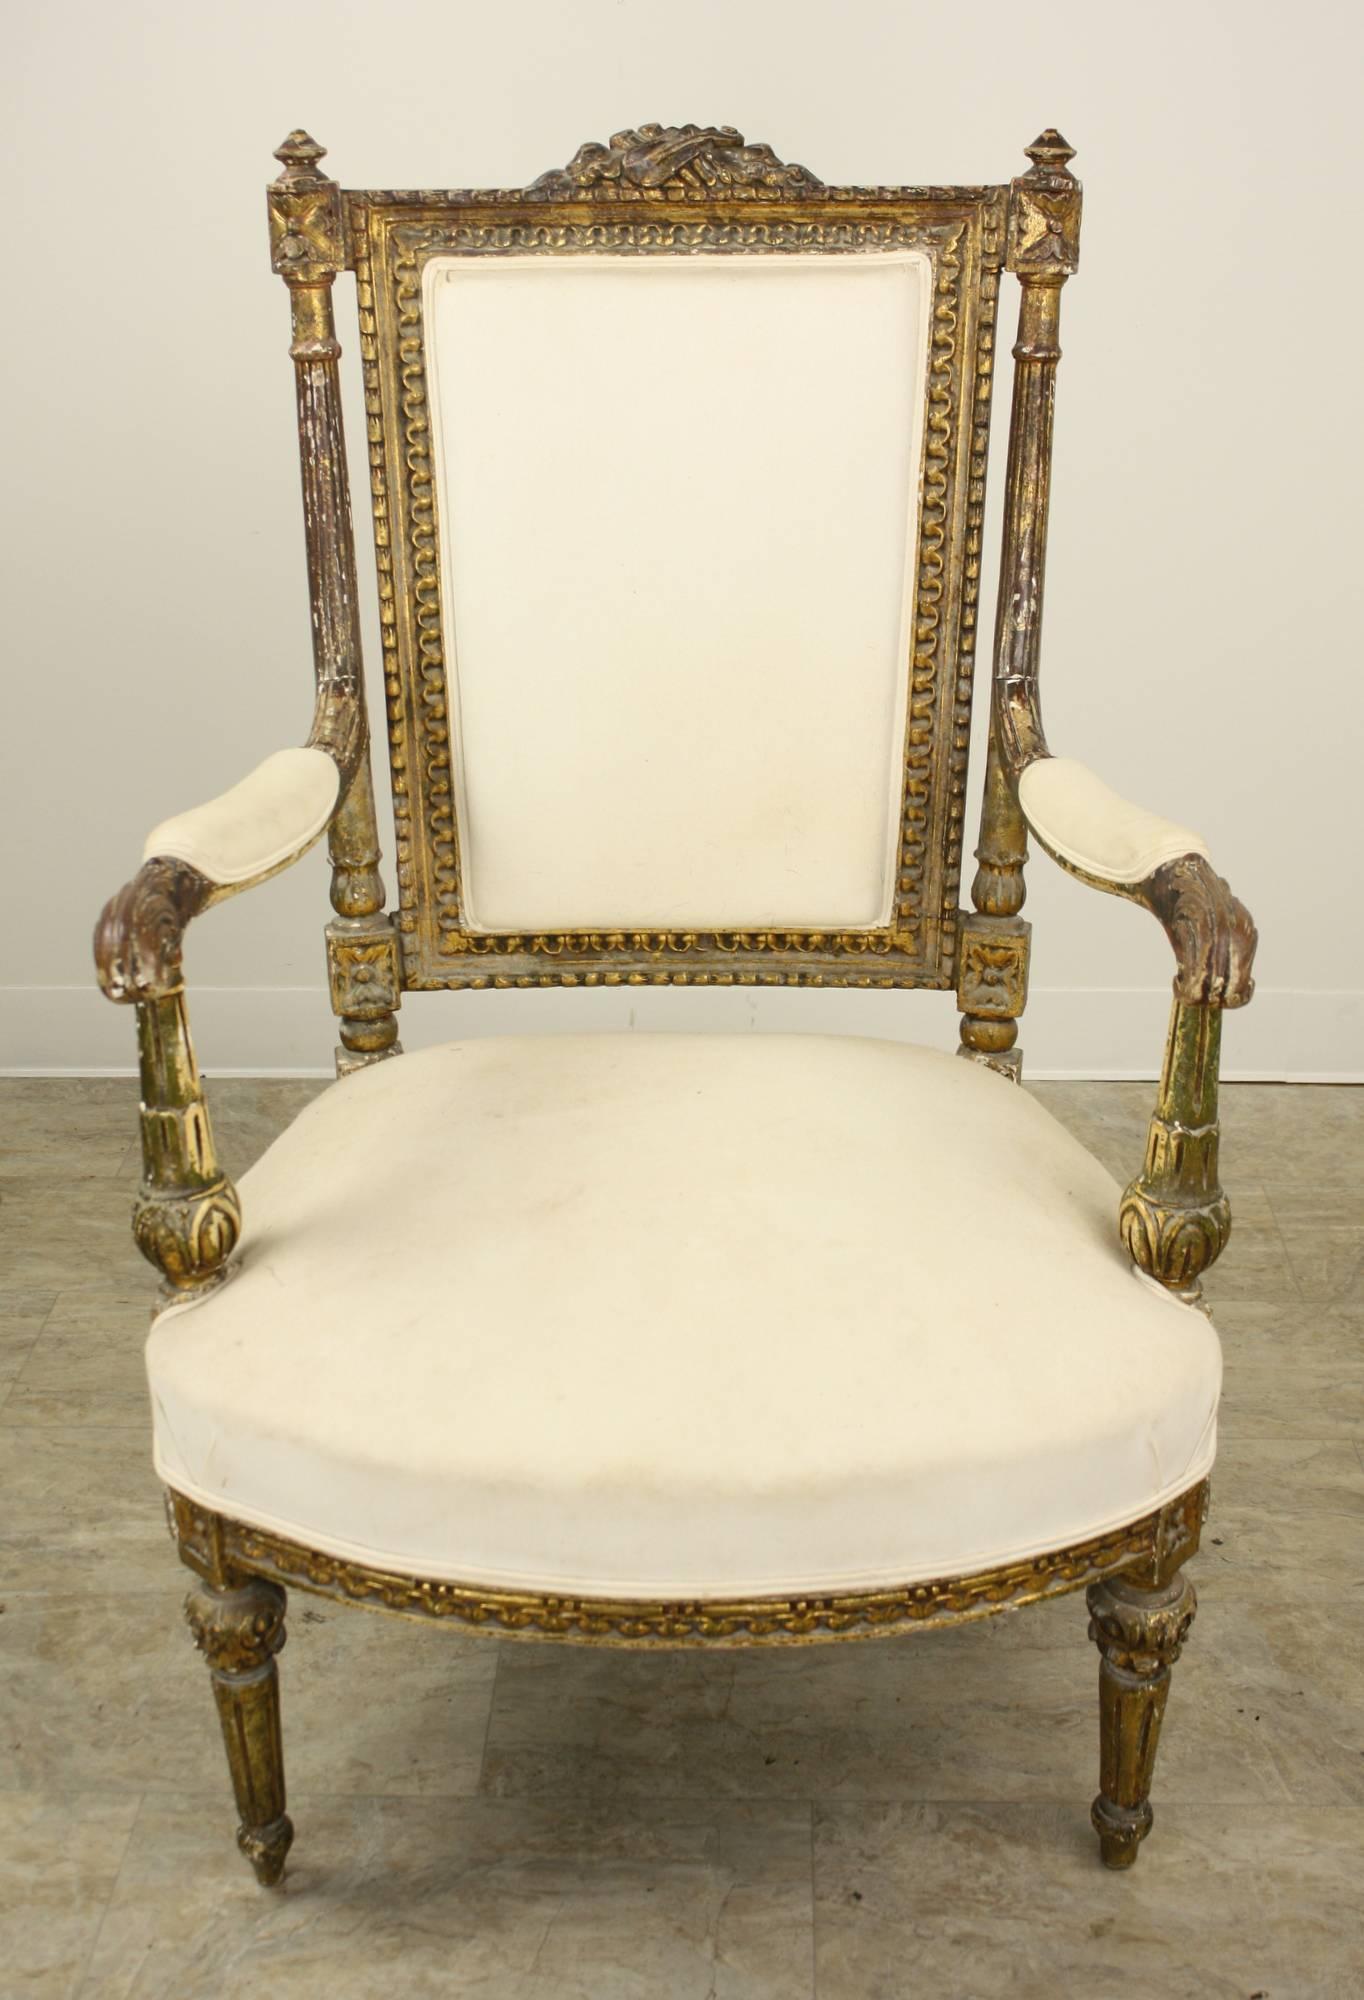 The gilding on these dramatic armchairs is beautifully worn, thus lending character and charm. Terrific carving is very well done, on all the wood surfaces. The comfortable upholstered seats are clean and new, with double welting for style. Very